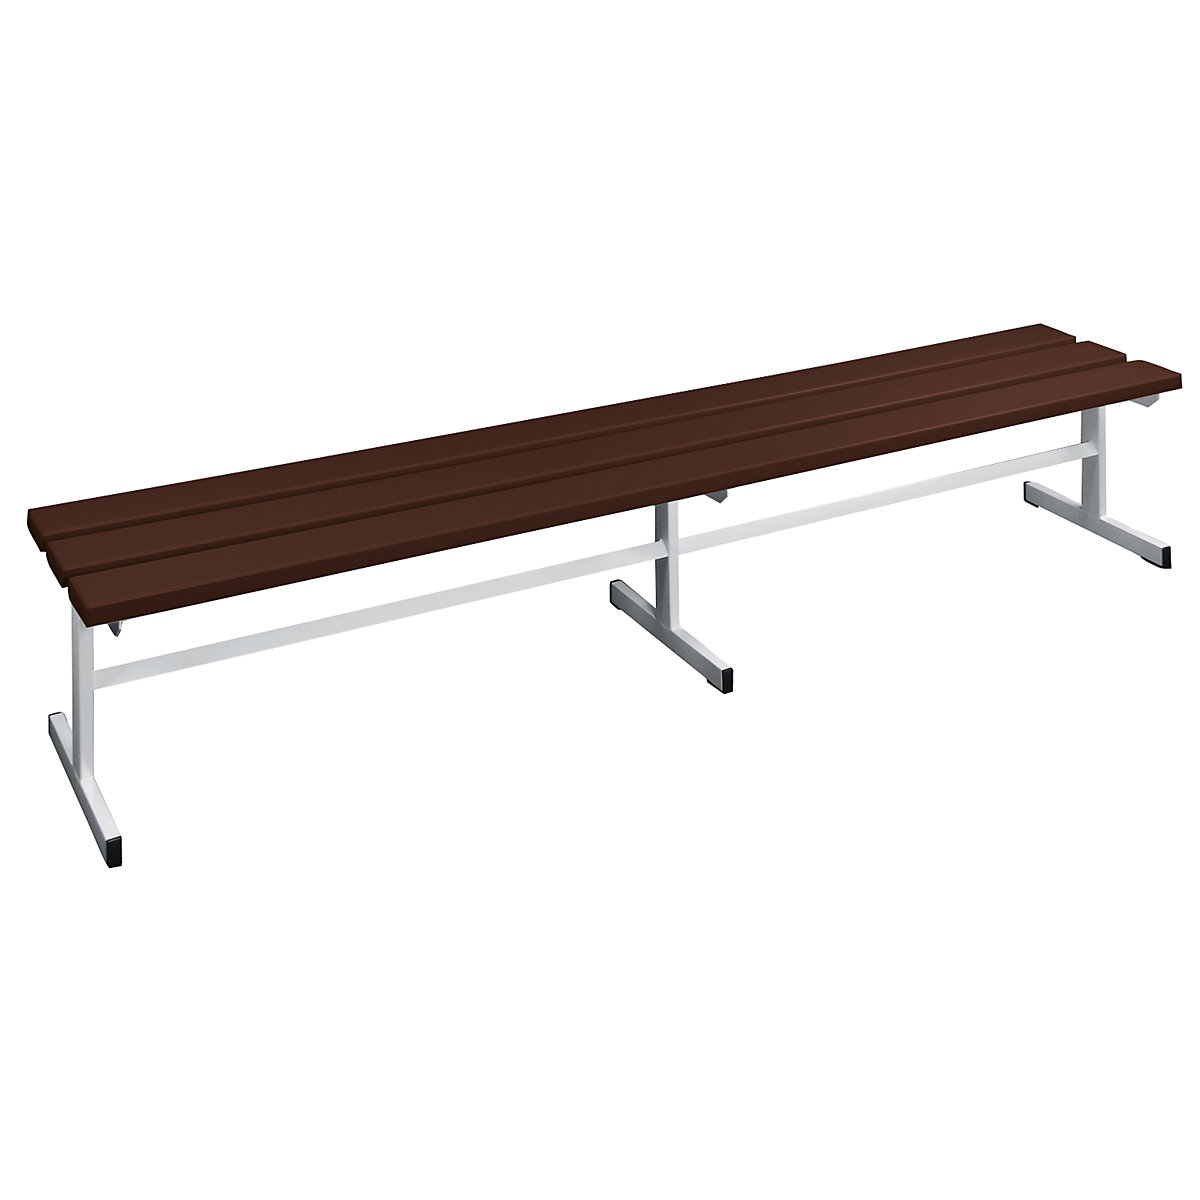 Wolf – Cloakroom bench, single sided seat, brown, 2000 mm length